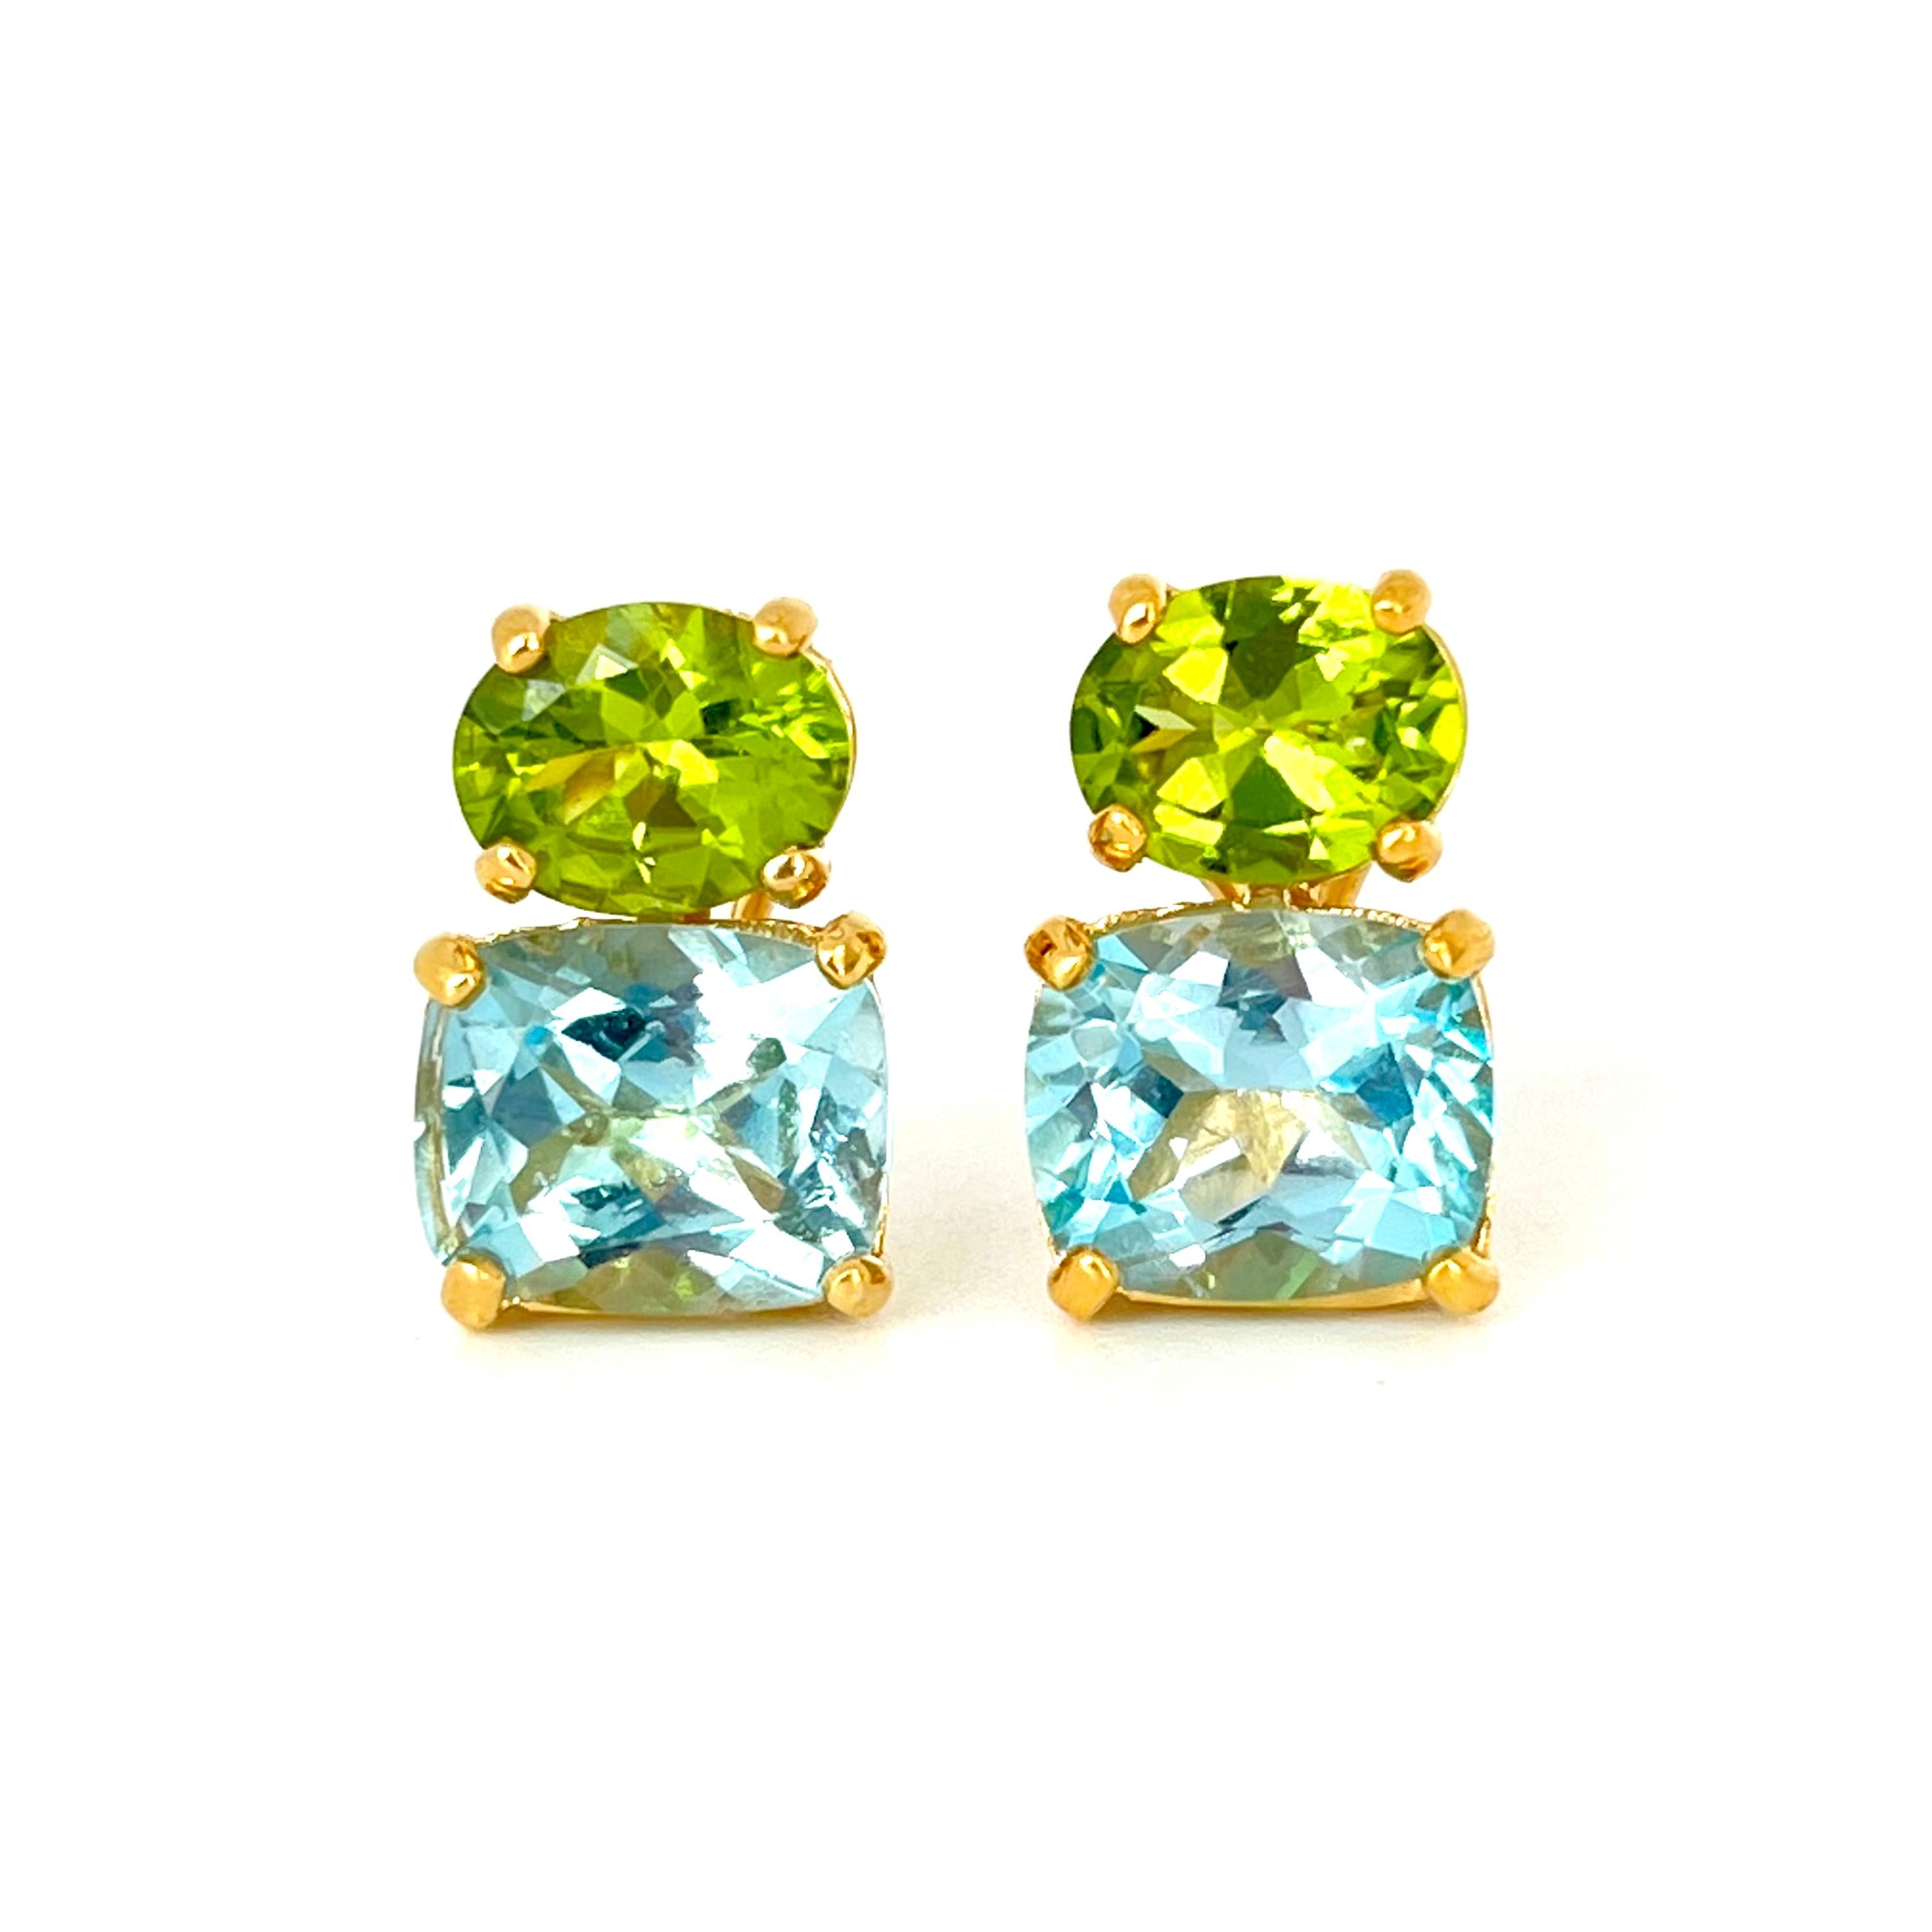 These stunning pair of earrings features a pair of genuine oval green peridot with cushion-cut sky blue topaz, handset in 18k yellow gold vermeil over sterling silver. The green and blue combination just look so great together! Straight post with